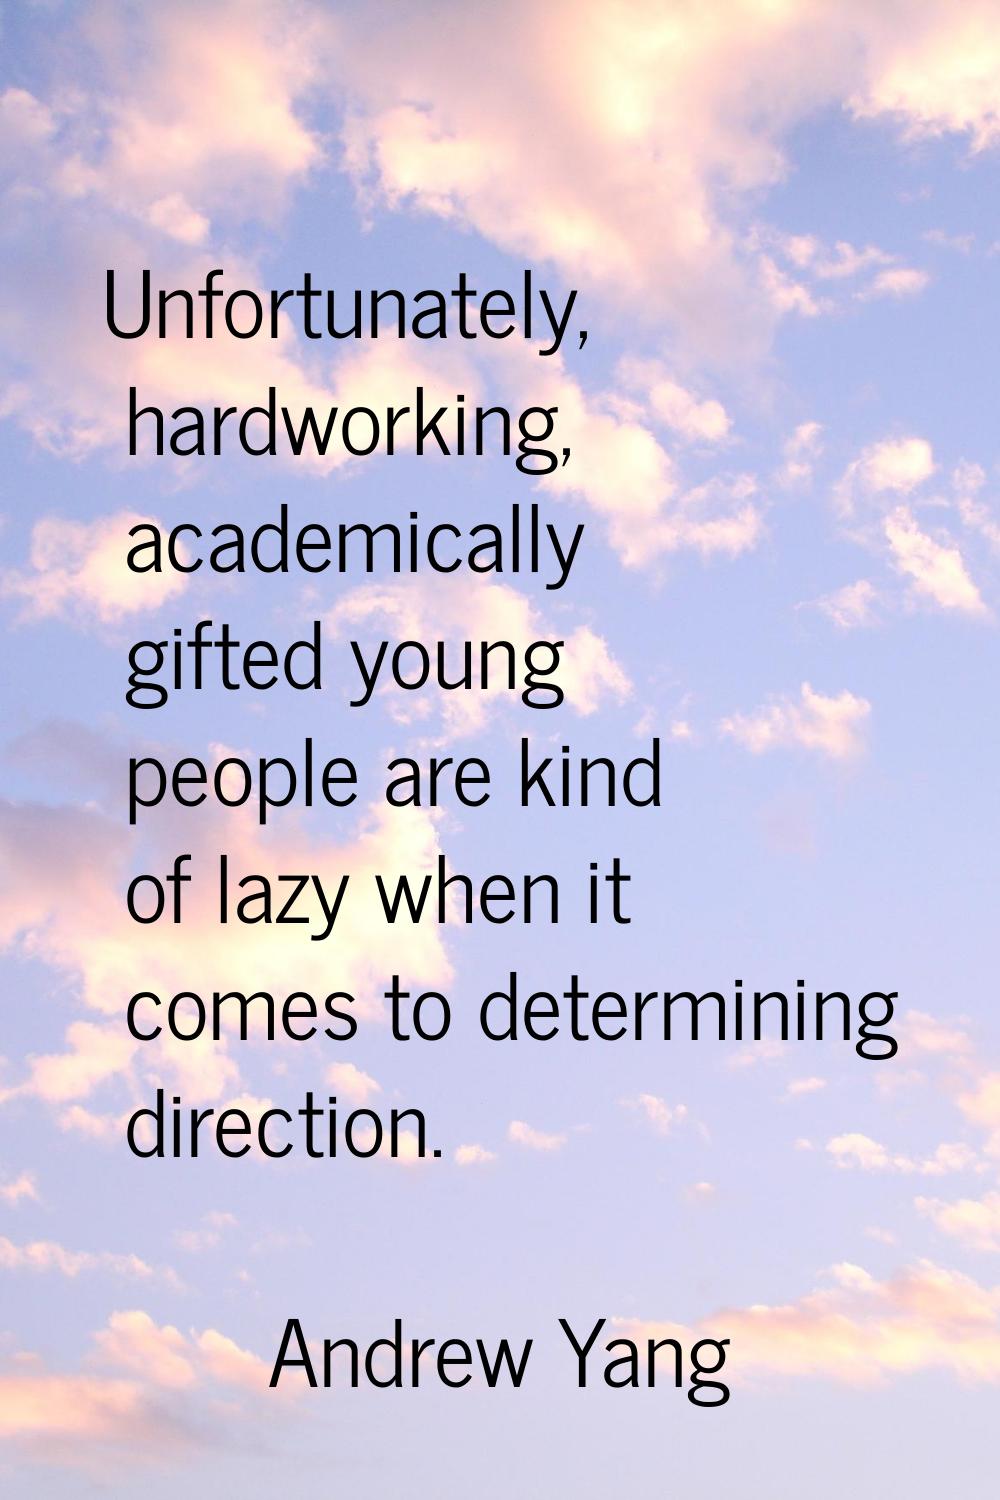 Unfortunately, hardworking, academically gifted young people are kind of lazy when it comes to dete